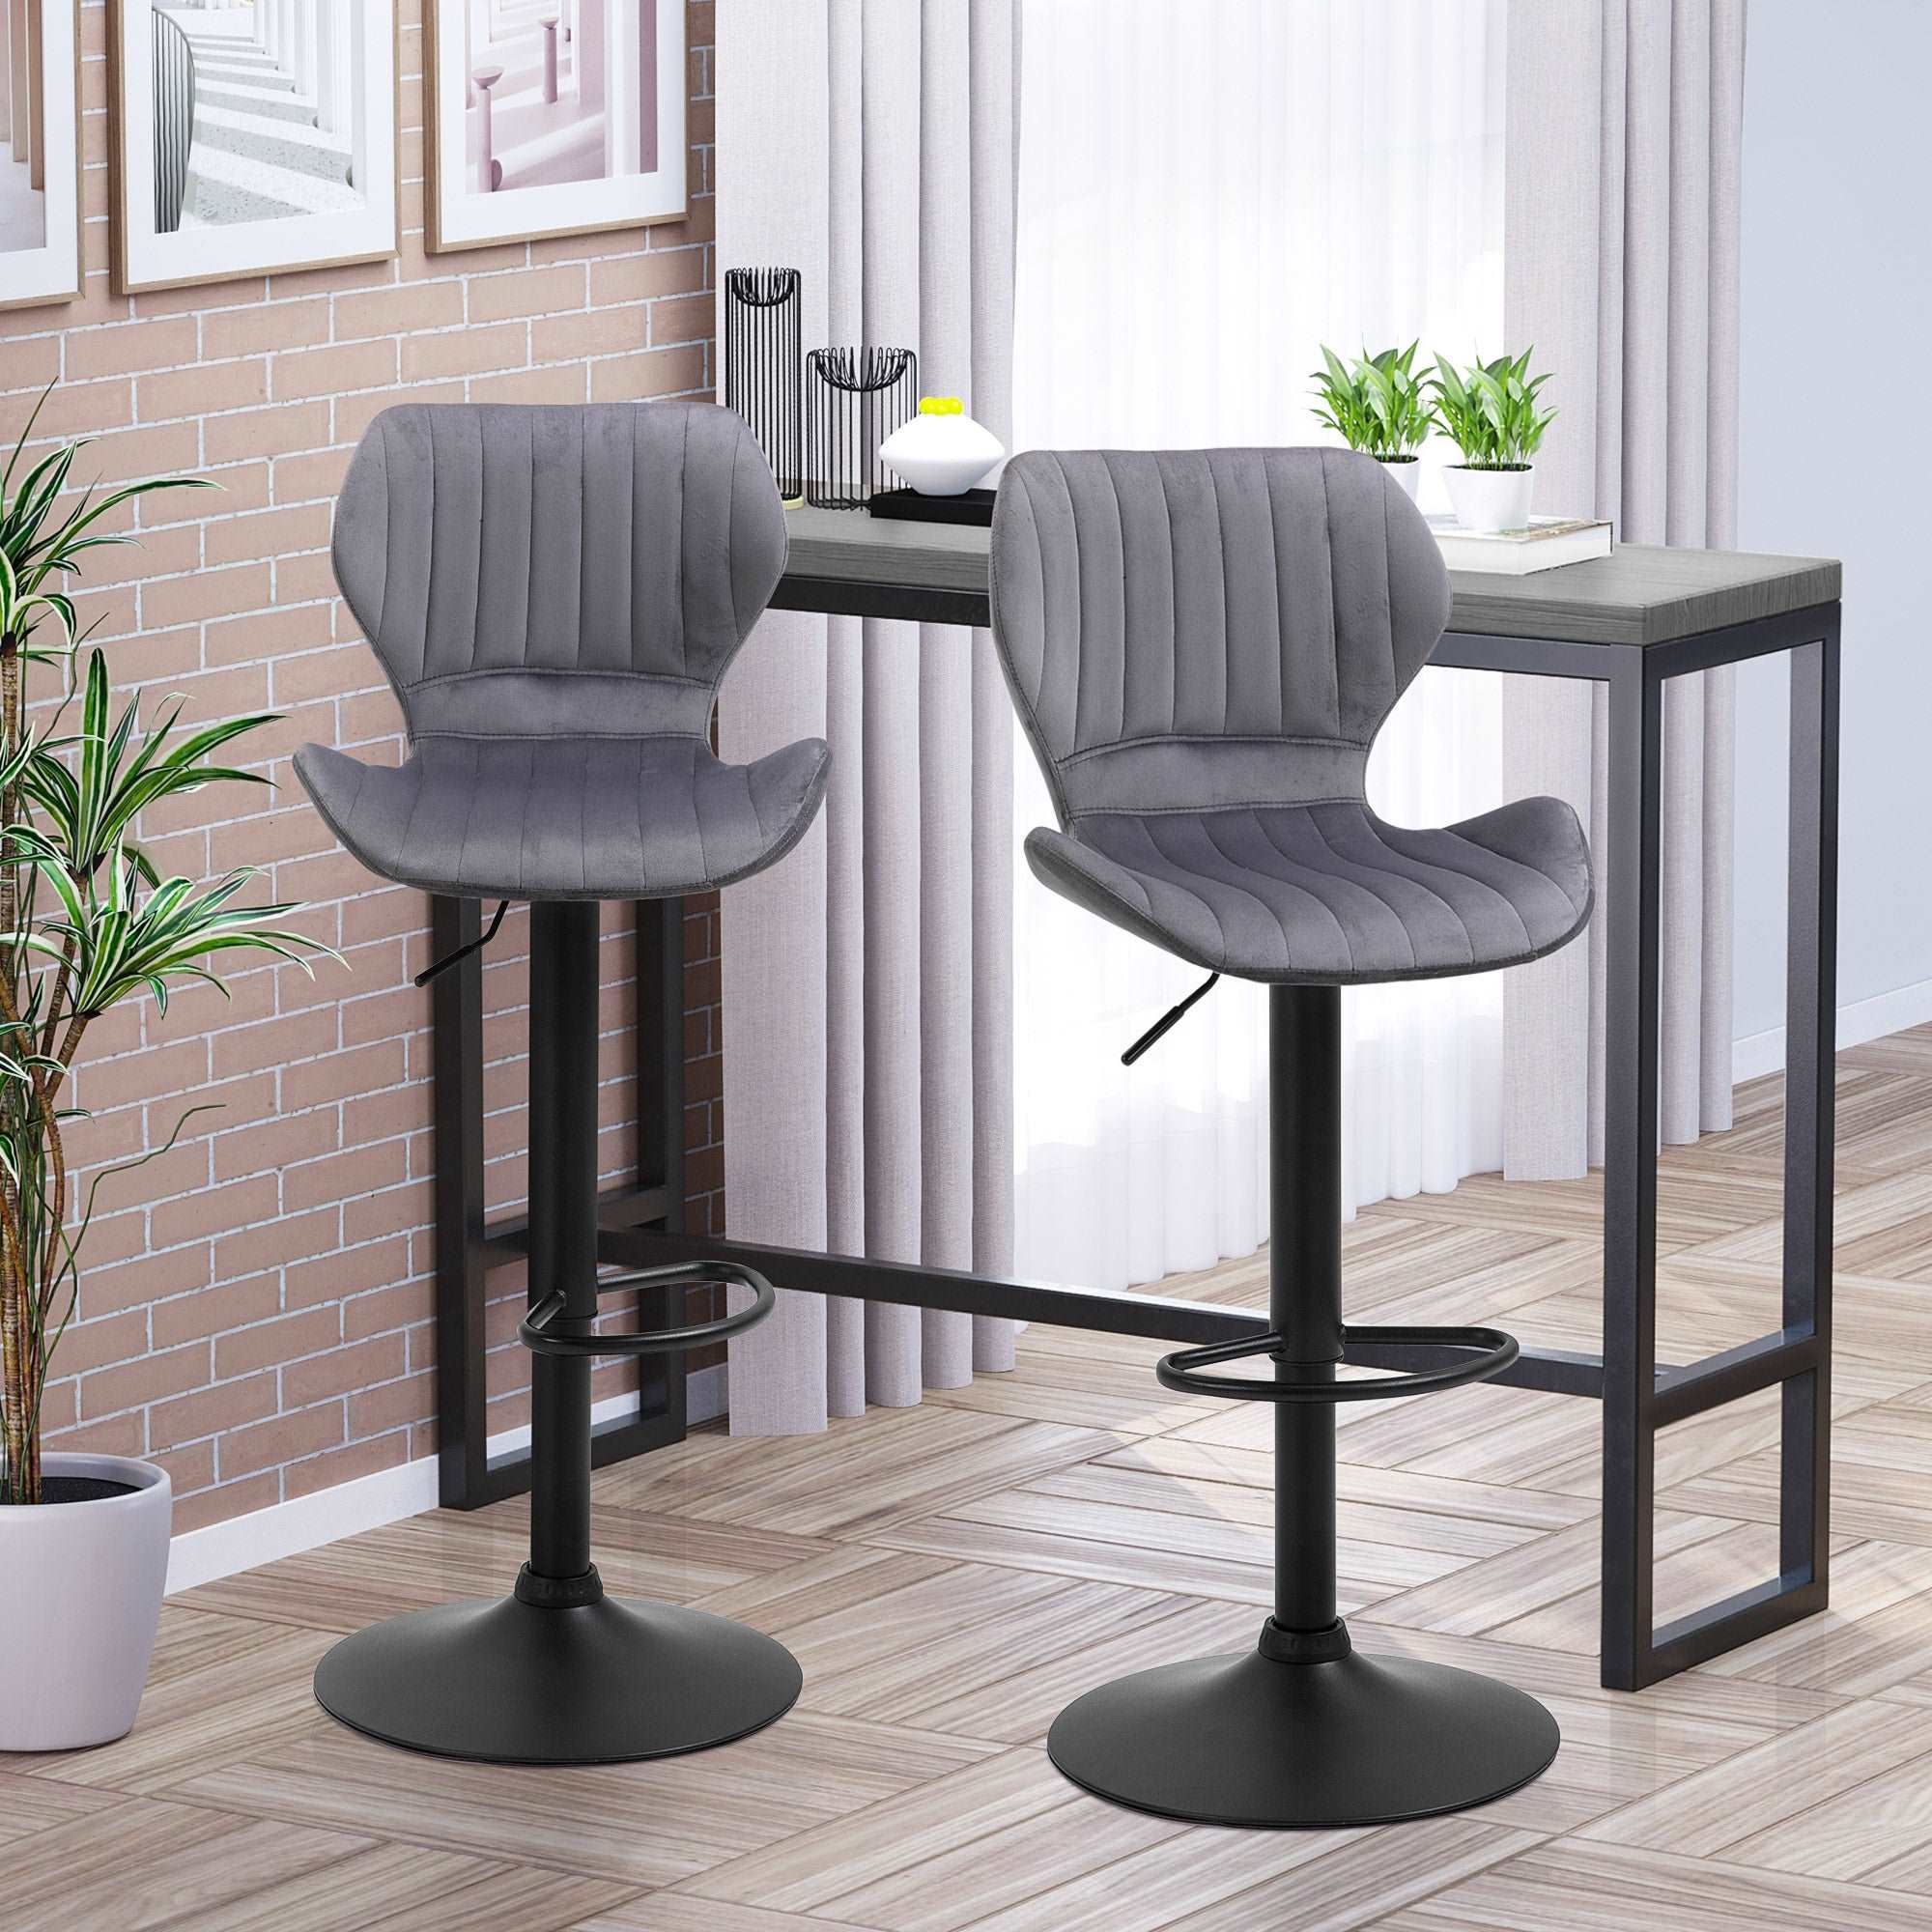 Velvet-Touch Bar Stools Set of 2 with Adjustable Height and Swivel Feature - Grey  AOSOM   